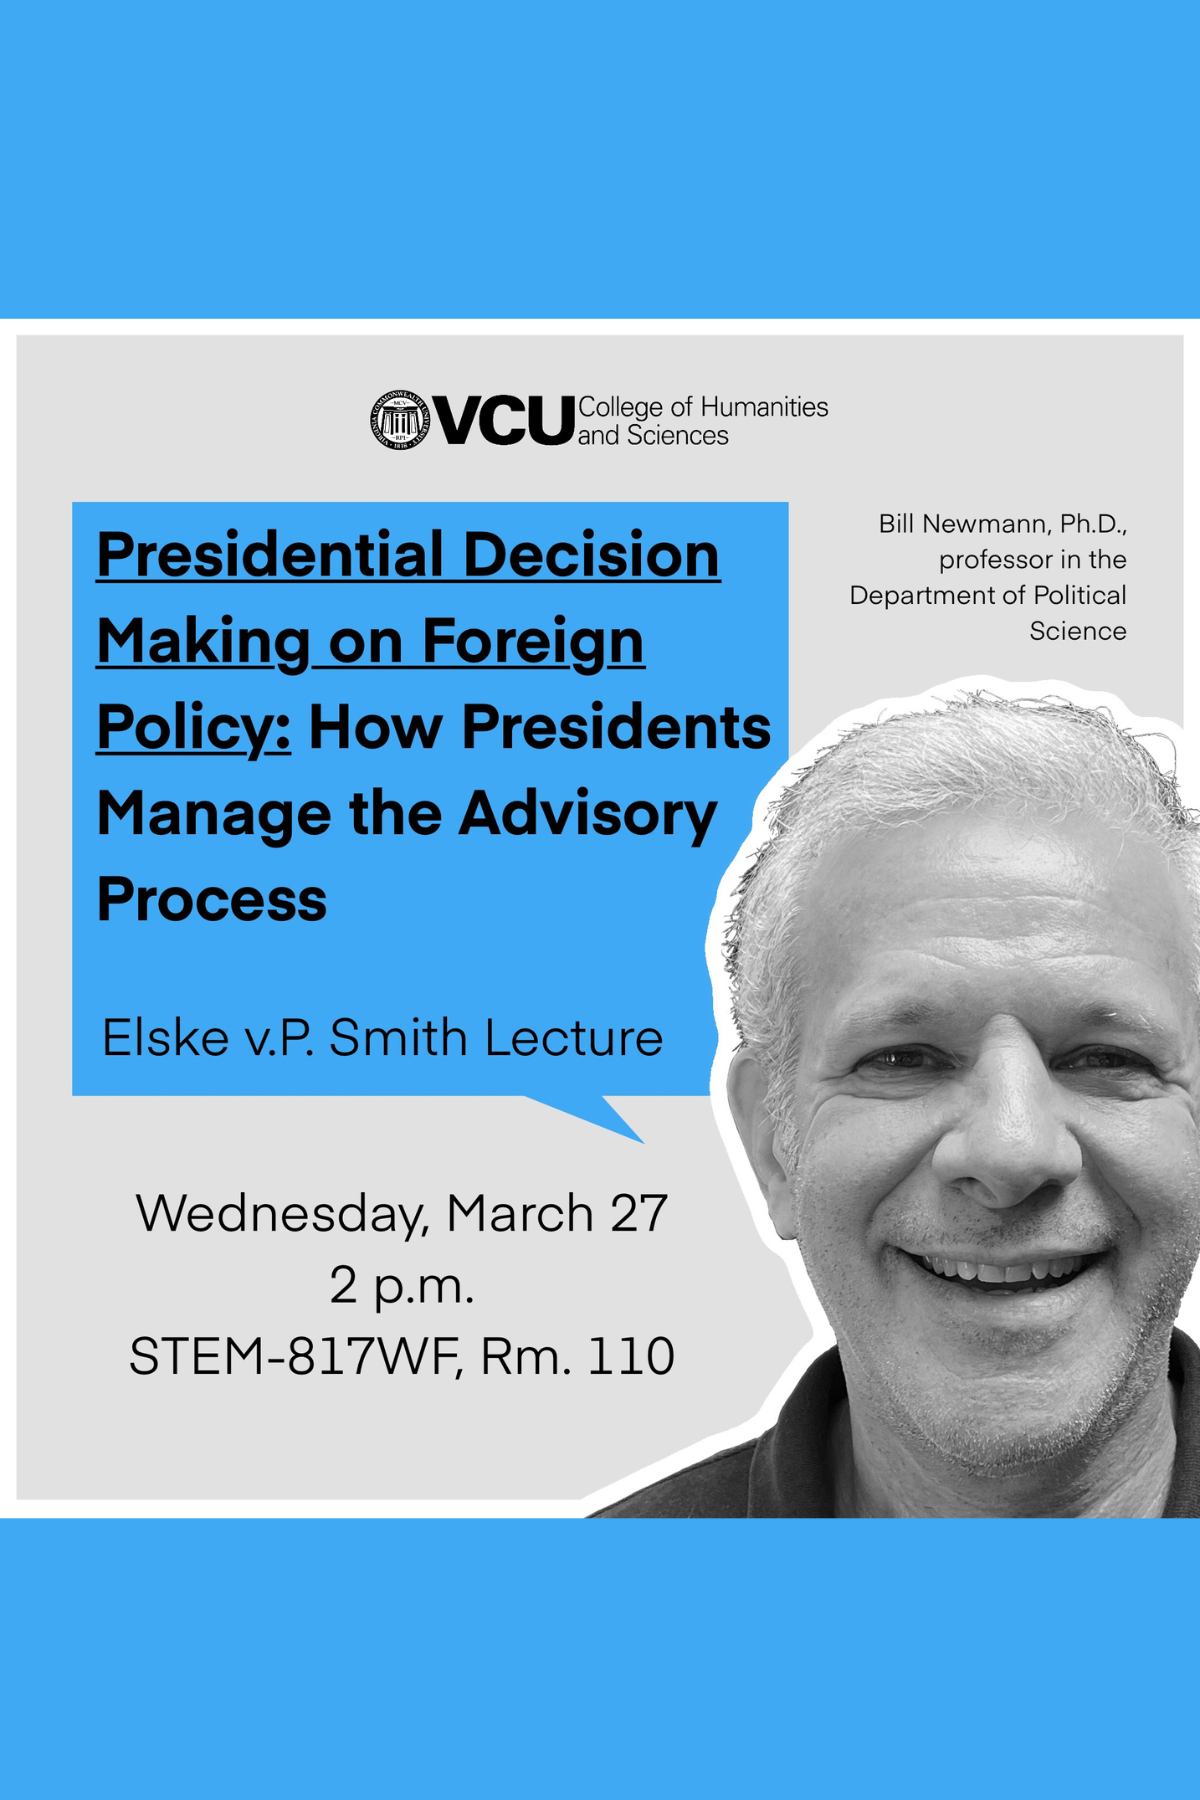 Elske vP Smith Lecture March 27